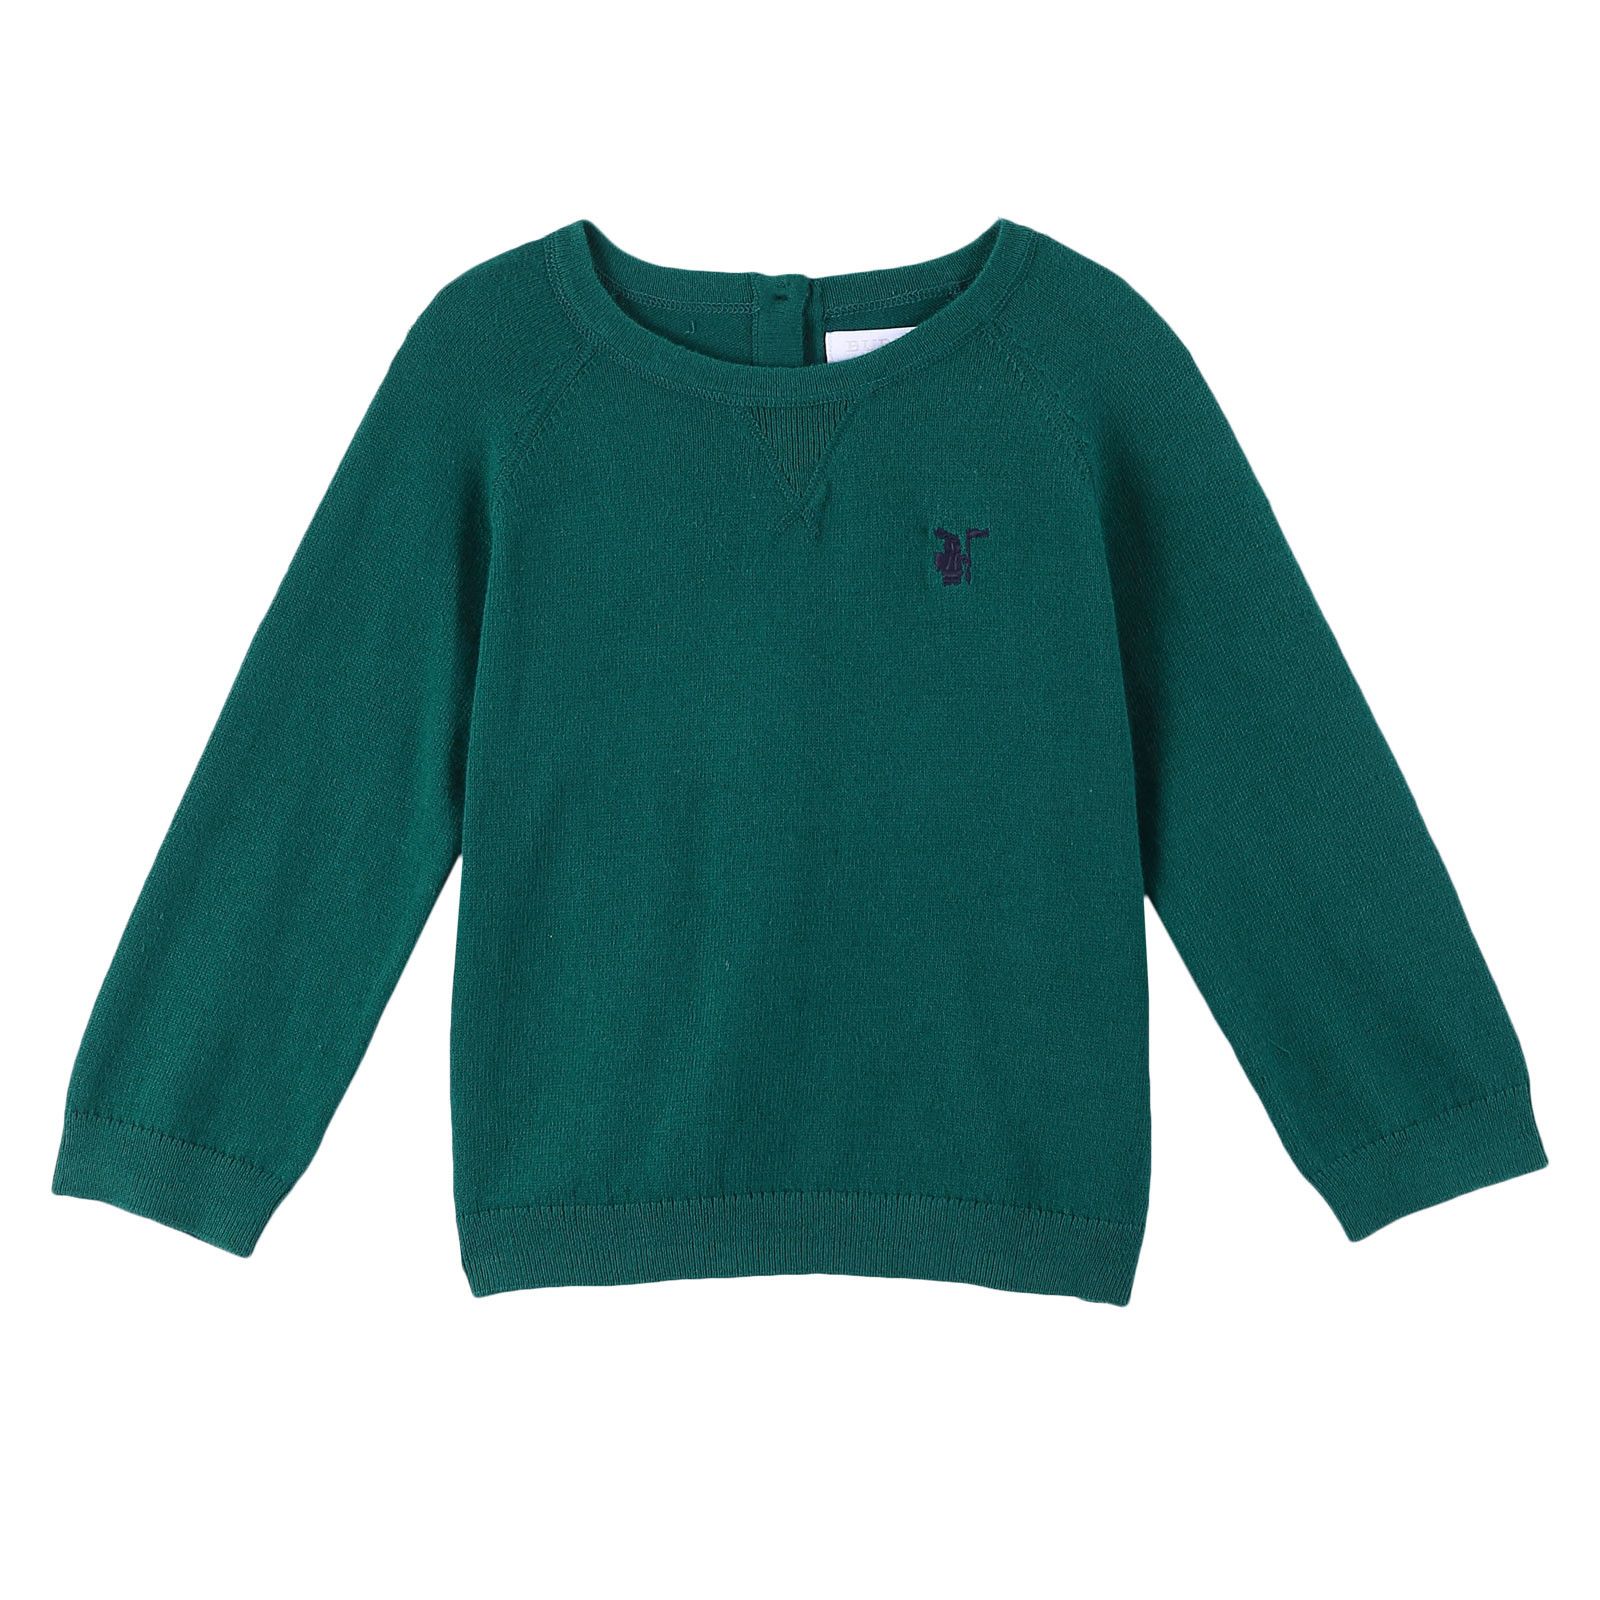 Baby Boys Deep Viridian Green Knitted Cotton Sweater - CÉMAROSE | Children's Fashion Store - 1